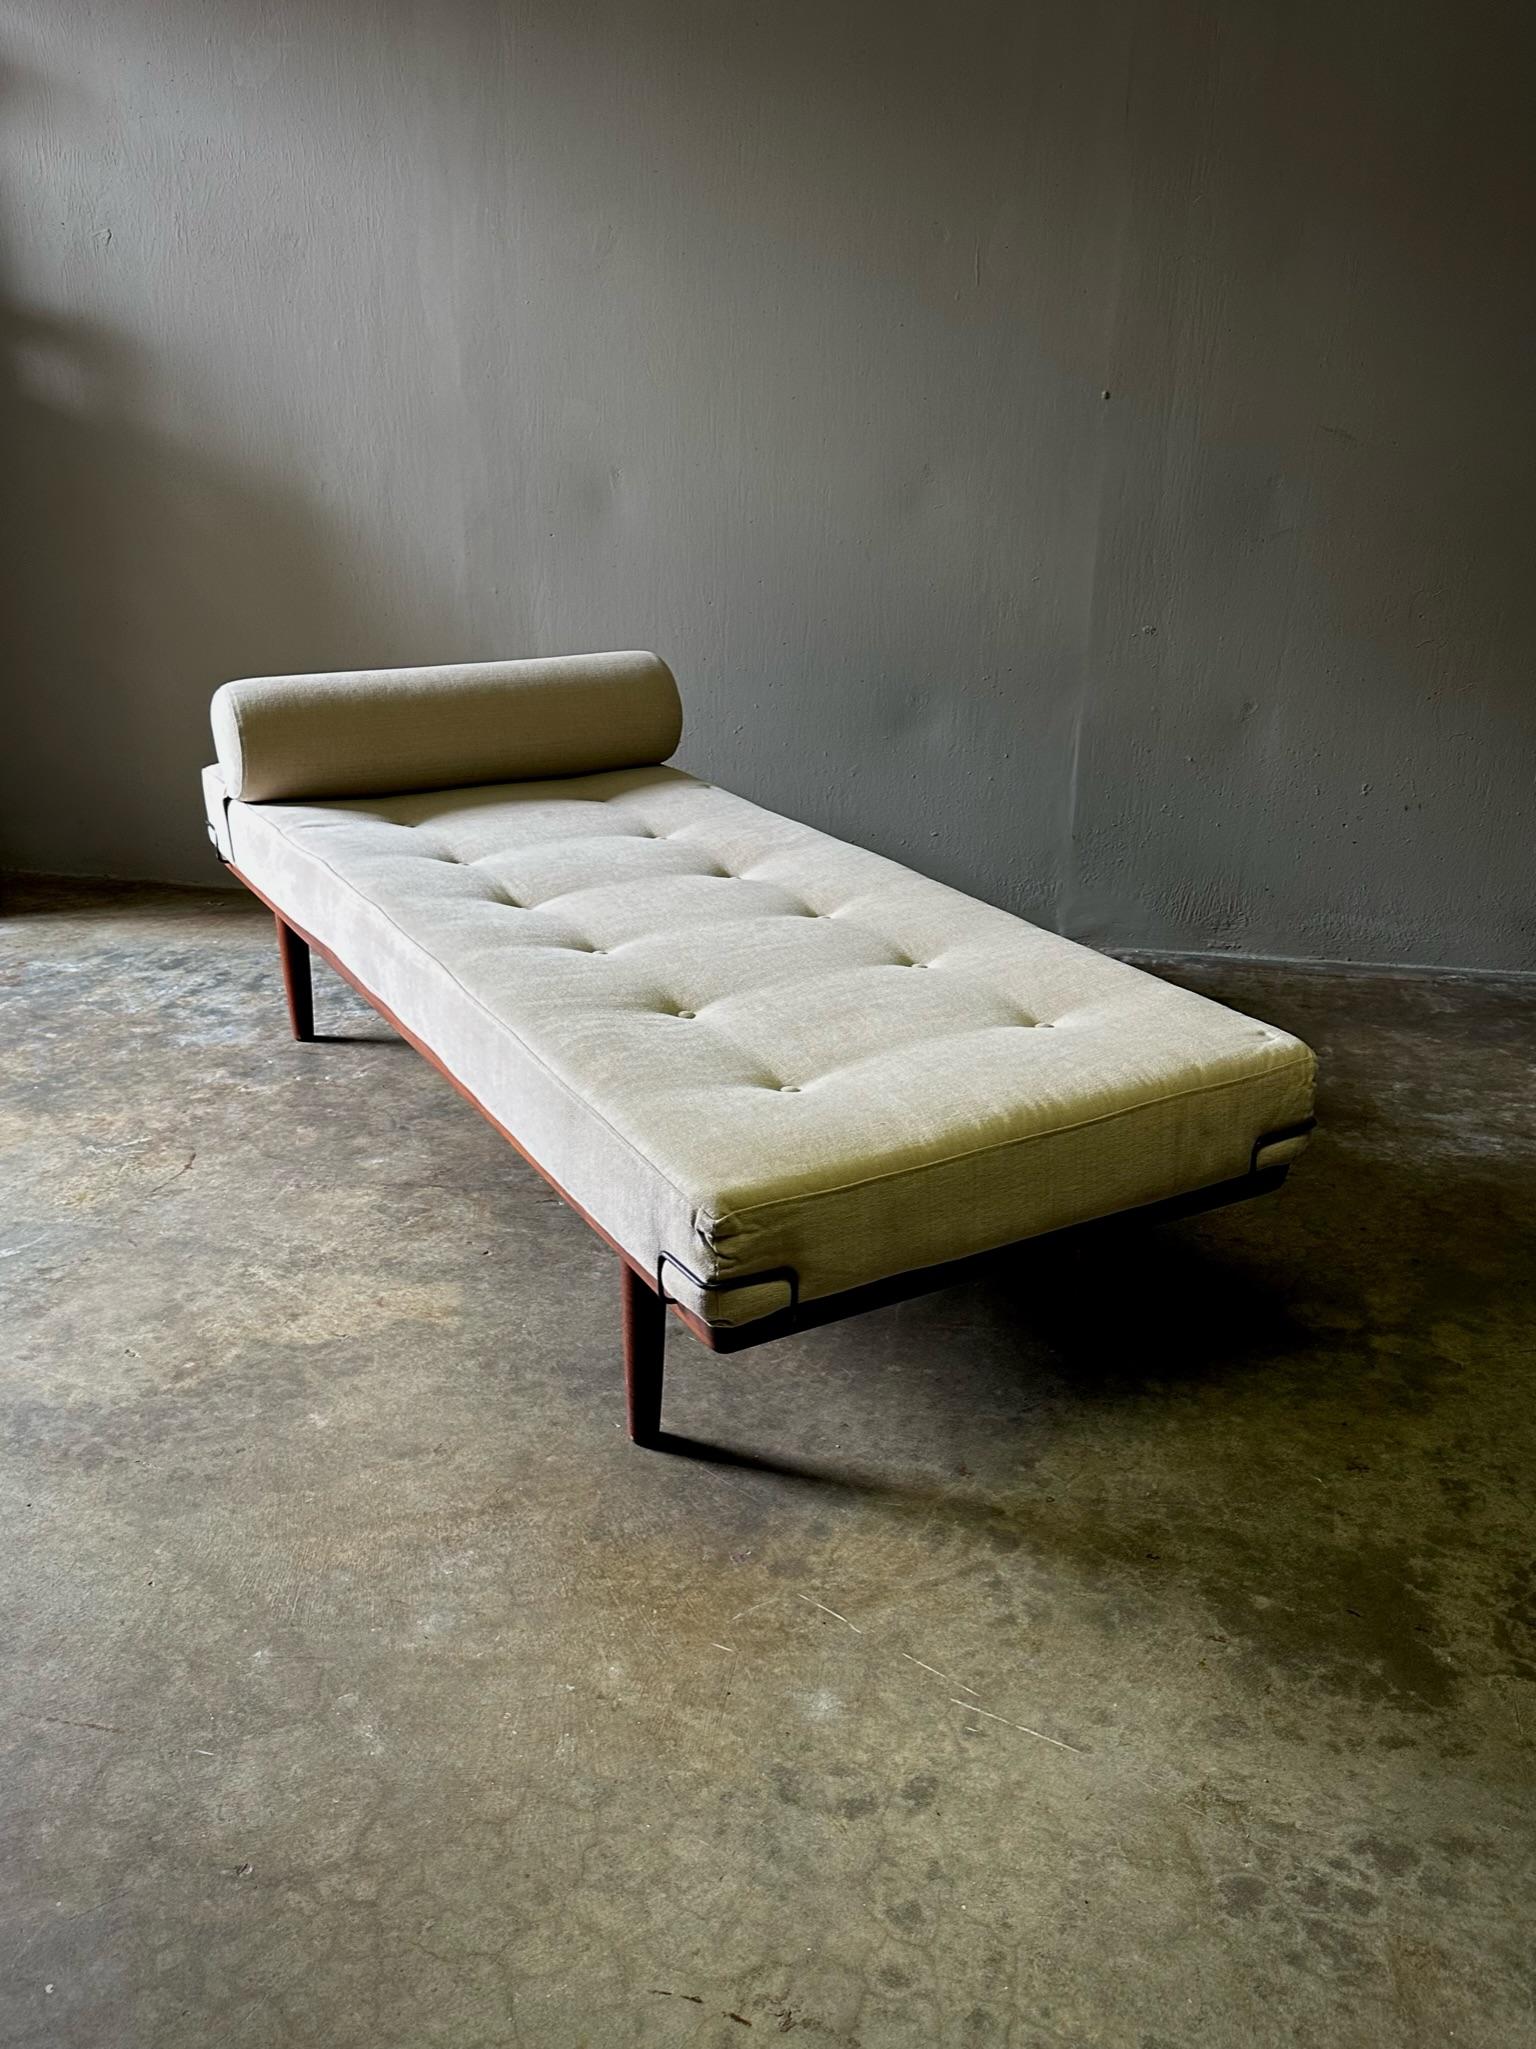 Rare Danish midcentury daybed by Frem Rojle, with sleek modern lines, wood base and ecru upholstered seat cushion with bolster pillow. Sensuous yet minimal. 

Denmark, circa 1960

Dimensions: 74W x 29D x 17H